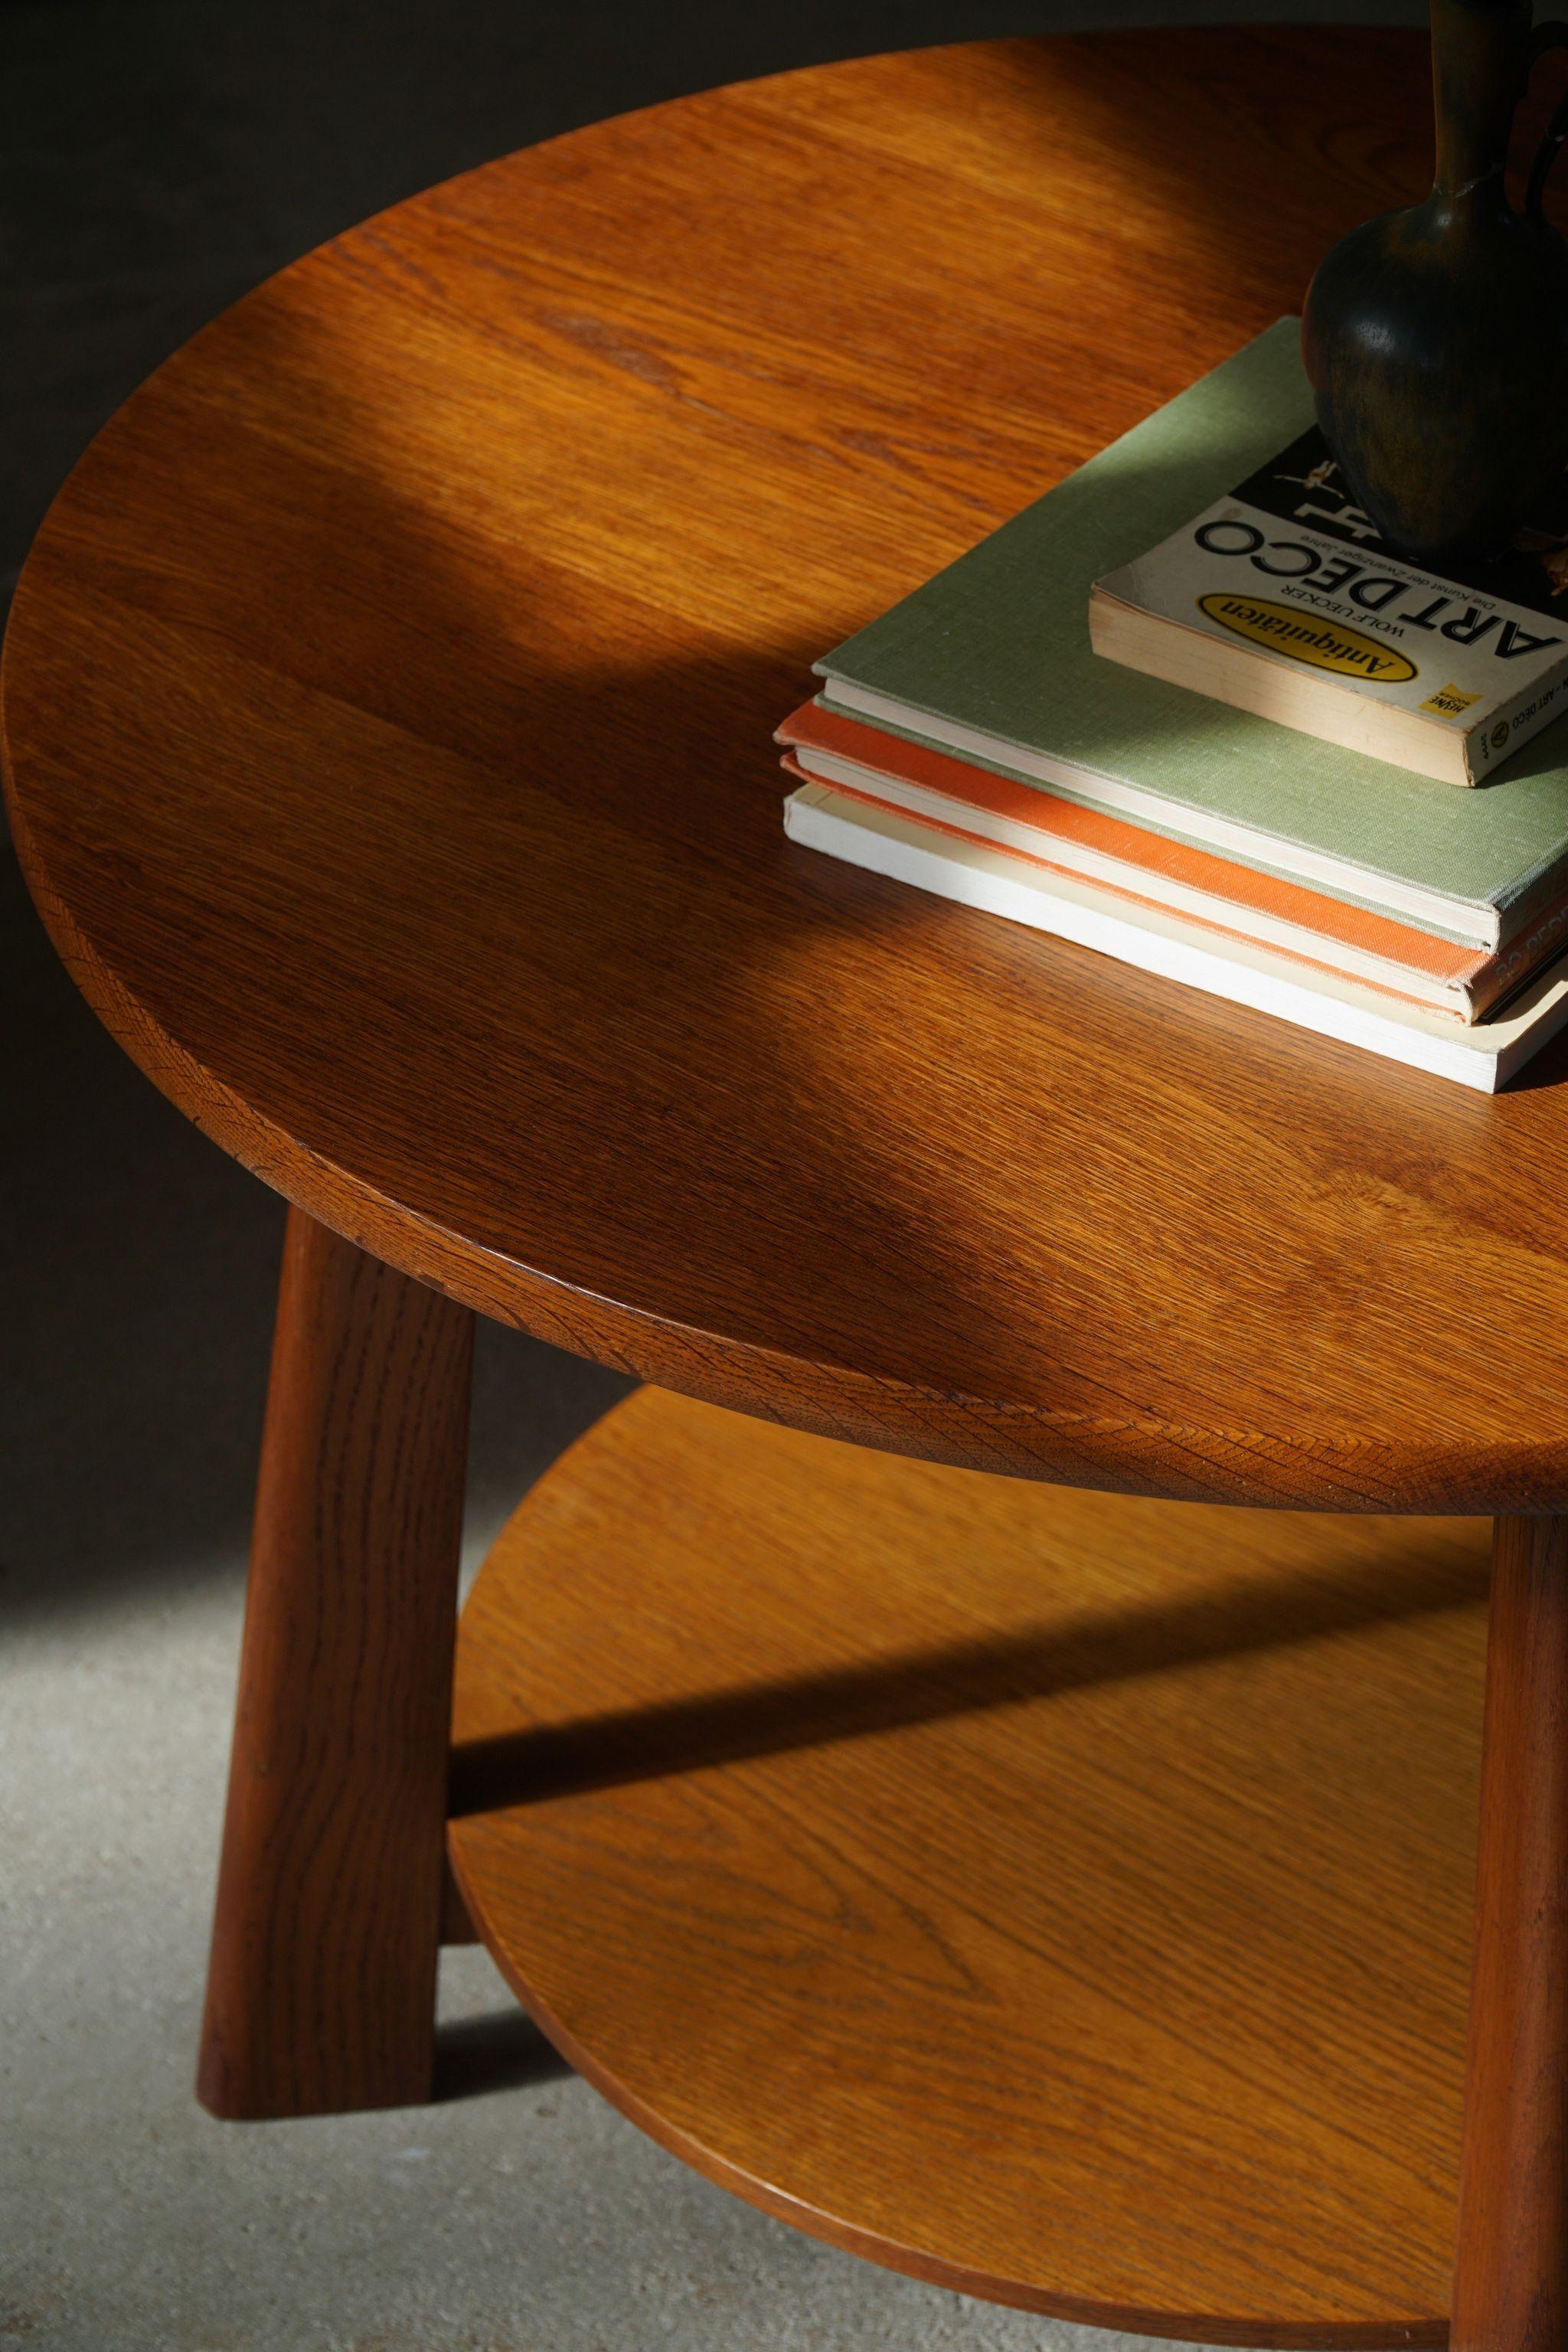 Hand-Crafted Otto Færge, Classic Round Side Table in Oak, Danish Modern, Made in 1940s